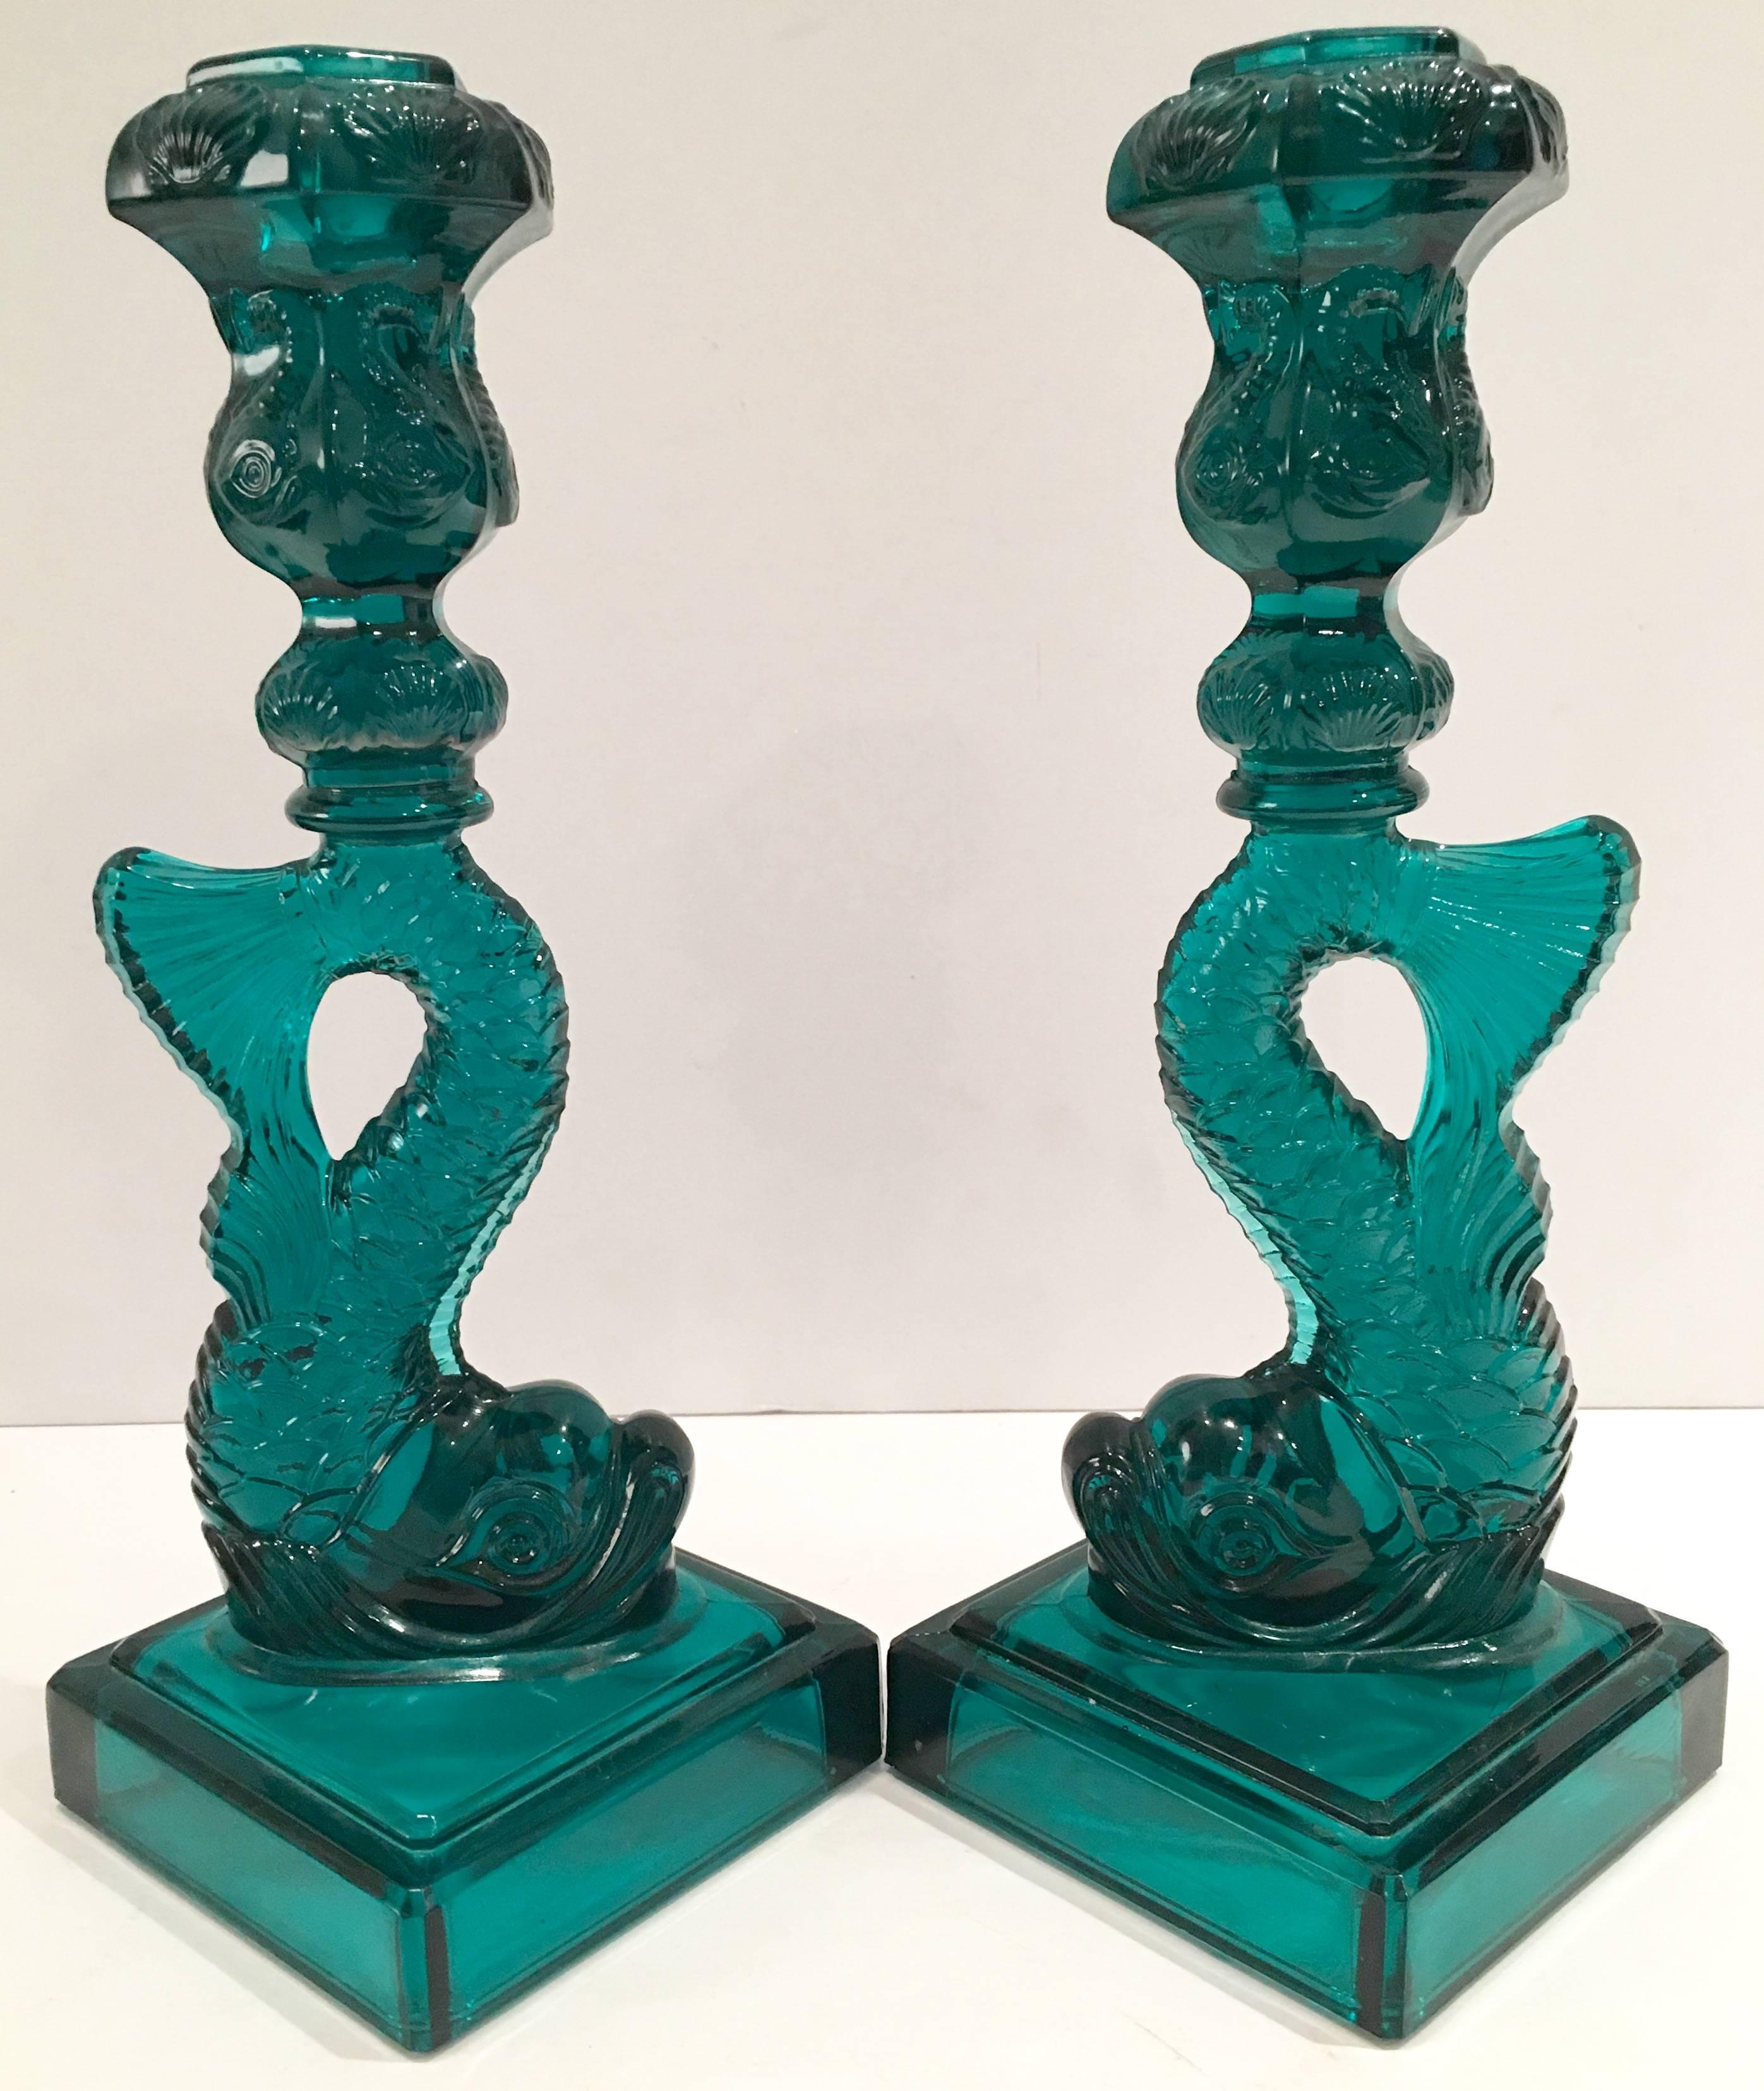 Coveted green American cut glass sculptural Koi fish candlesticks signed, MMA. These lovely emerald green glass candlesticks were reproduced in the 1970s by Imperial Glass Company for the Metropolitan Museum Of Art as a limited edition. Each